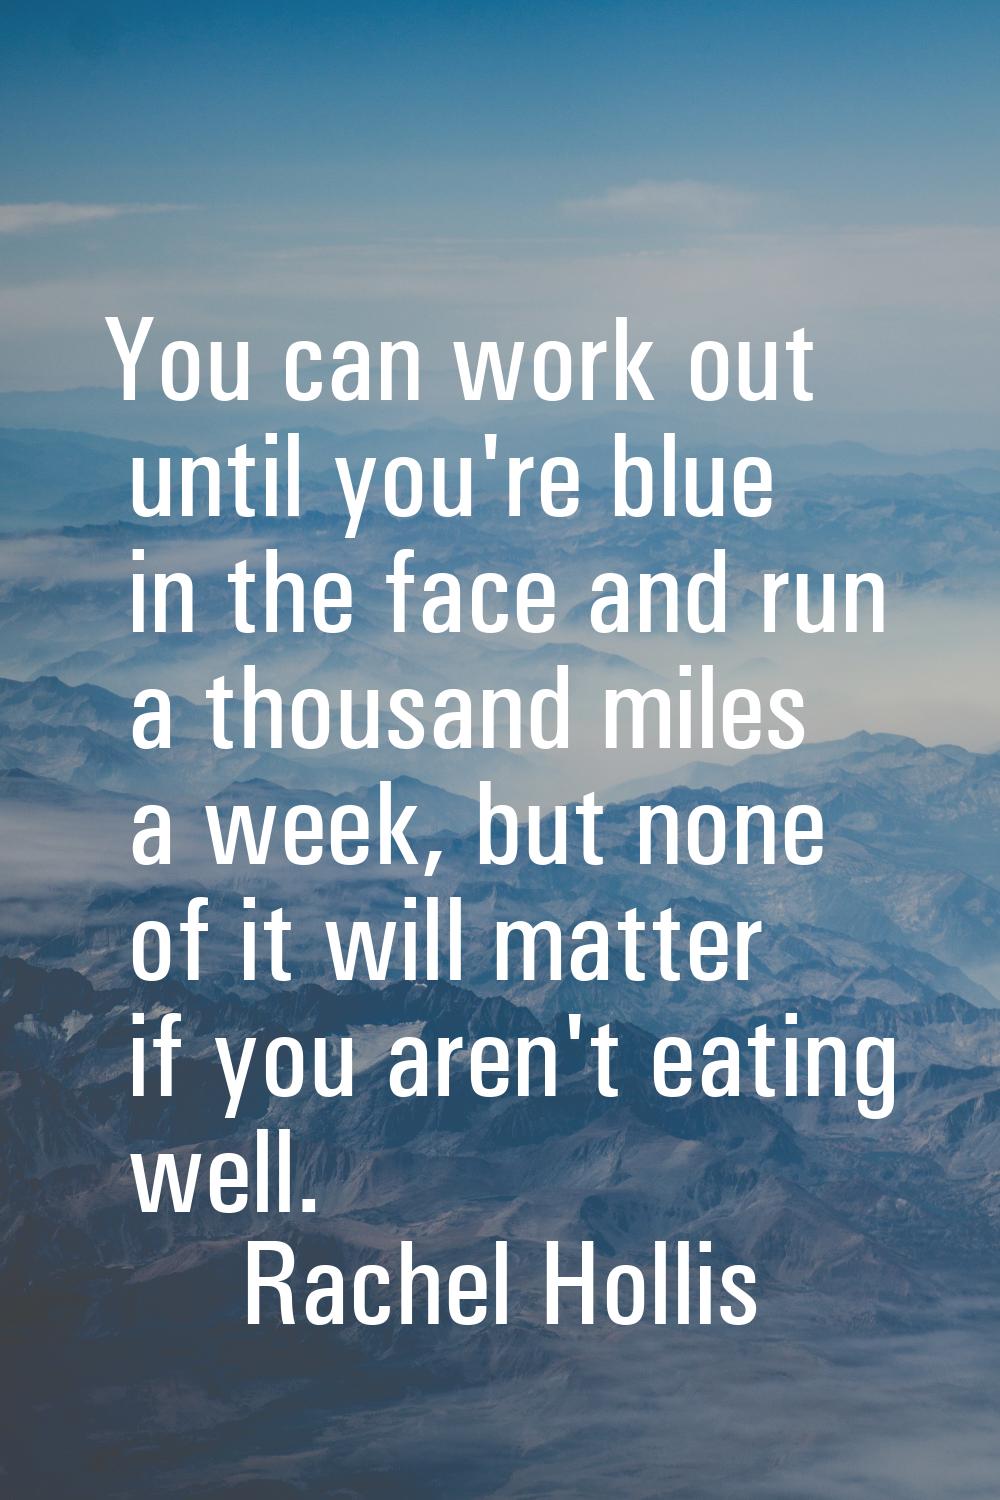 You can work out until you're blue in the face and run a thousand miles a week, but none of it will